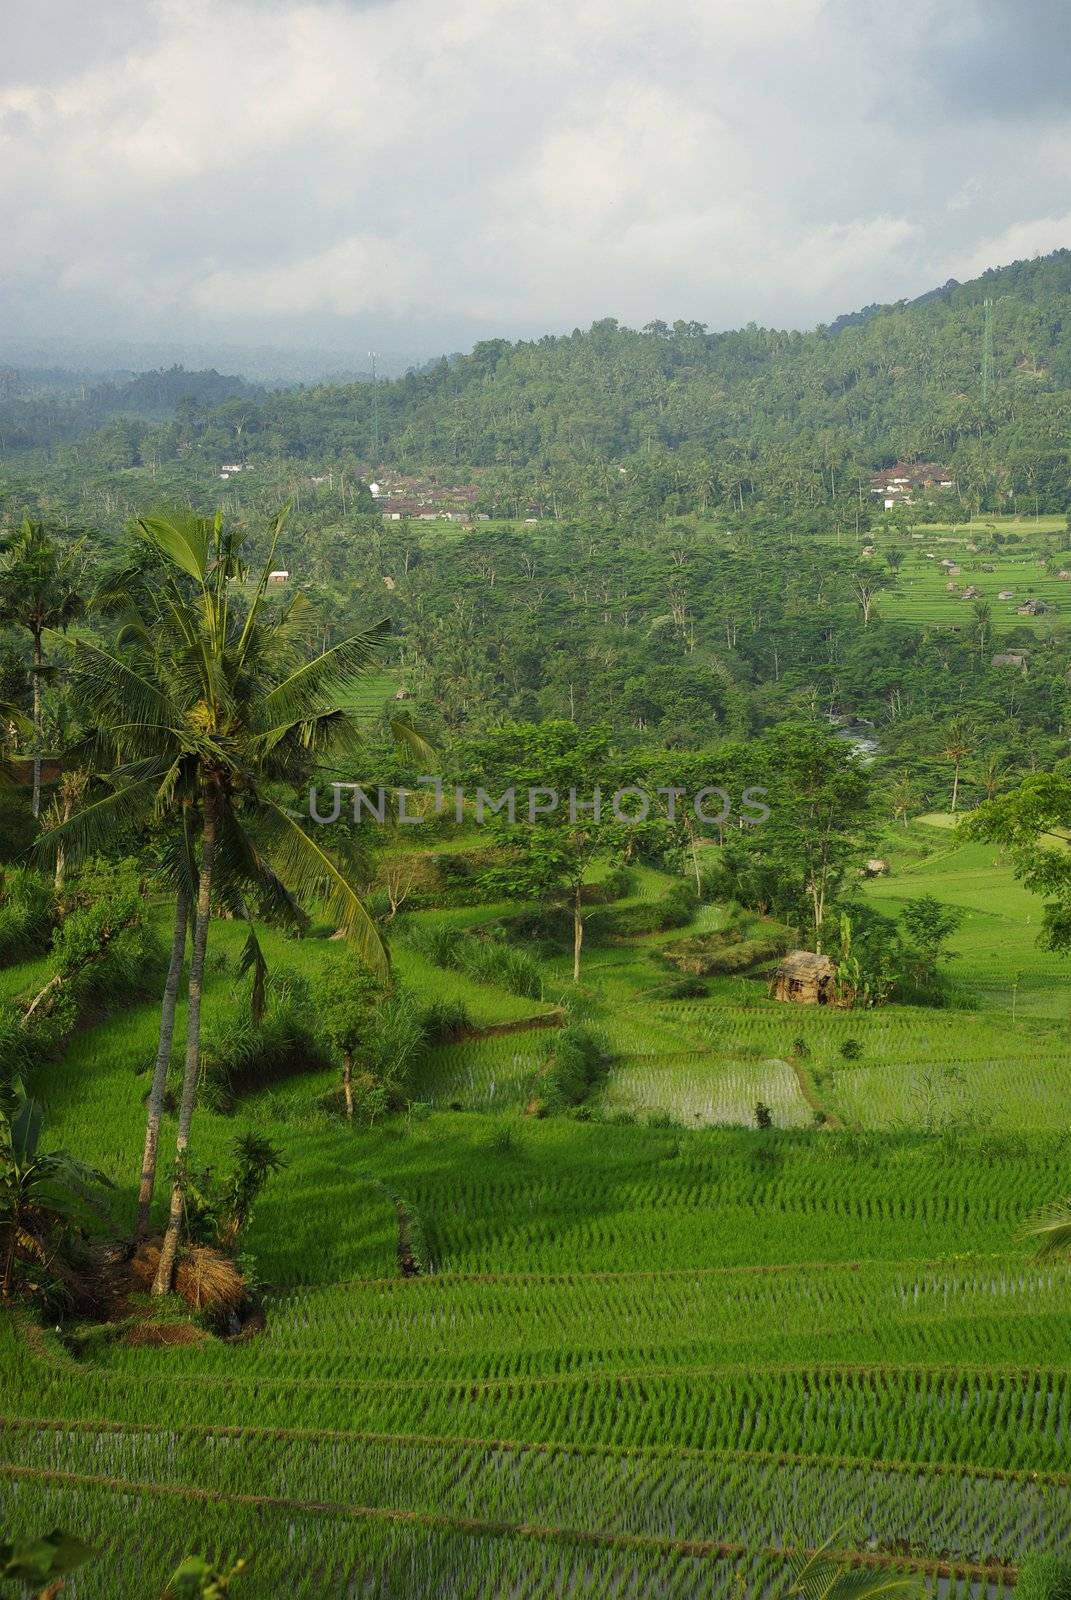 Landscape of young watered ricefield with some coconut palm and a forest in the background in Bali island